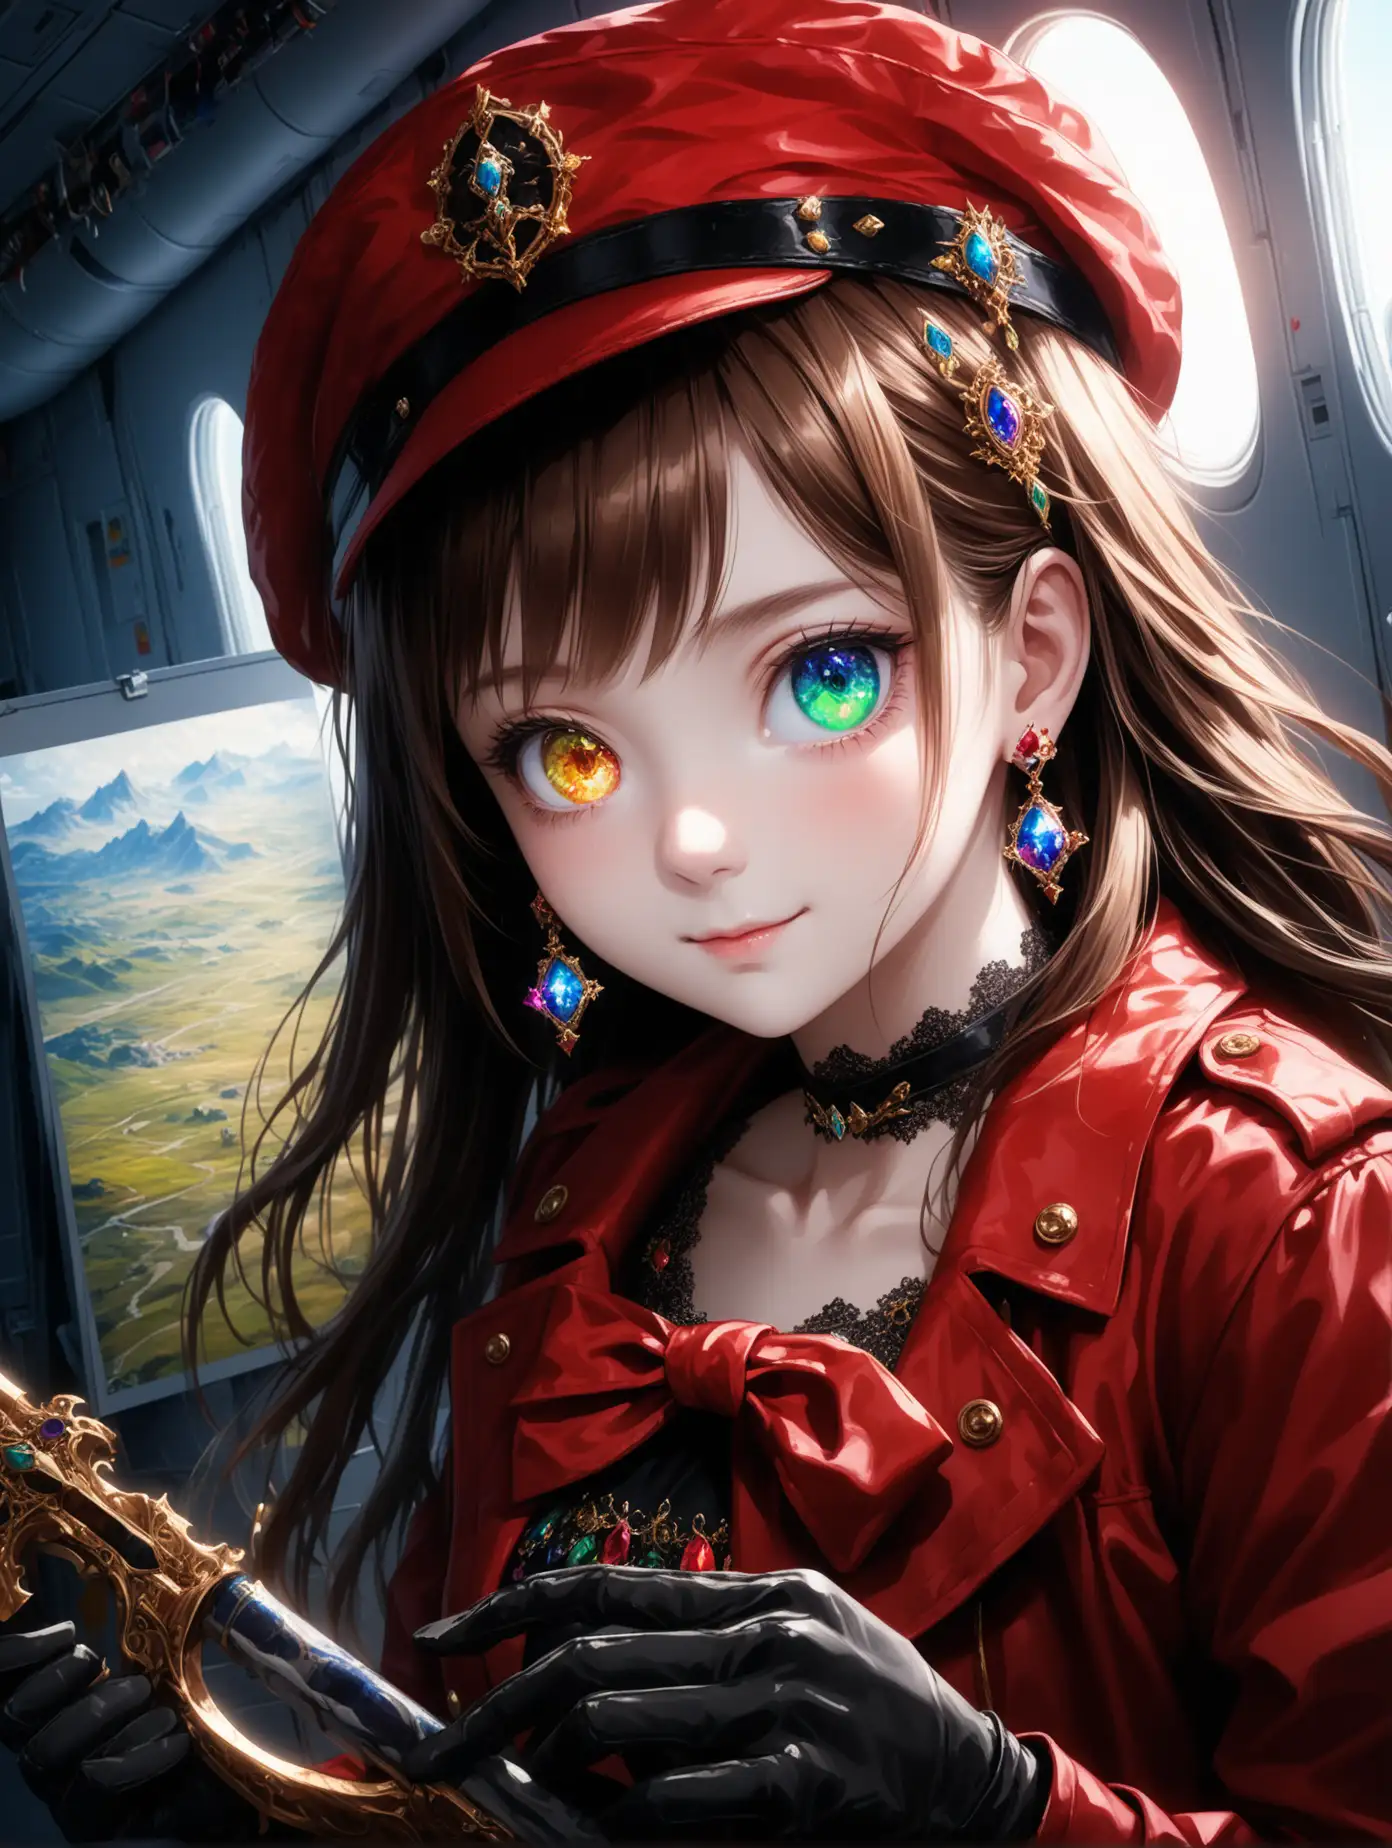 Girl-with-Heterochromia-and-Crystal-Accessories-in-Airplane-Scene